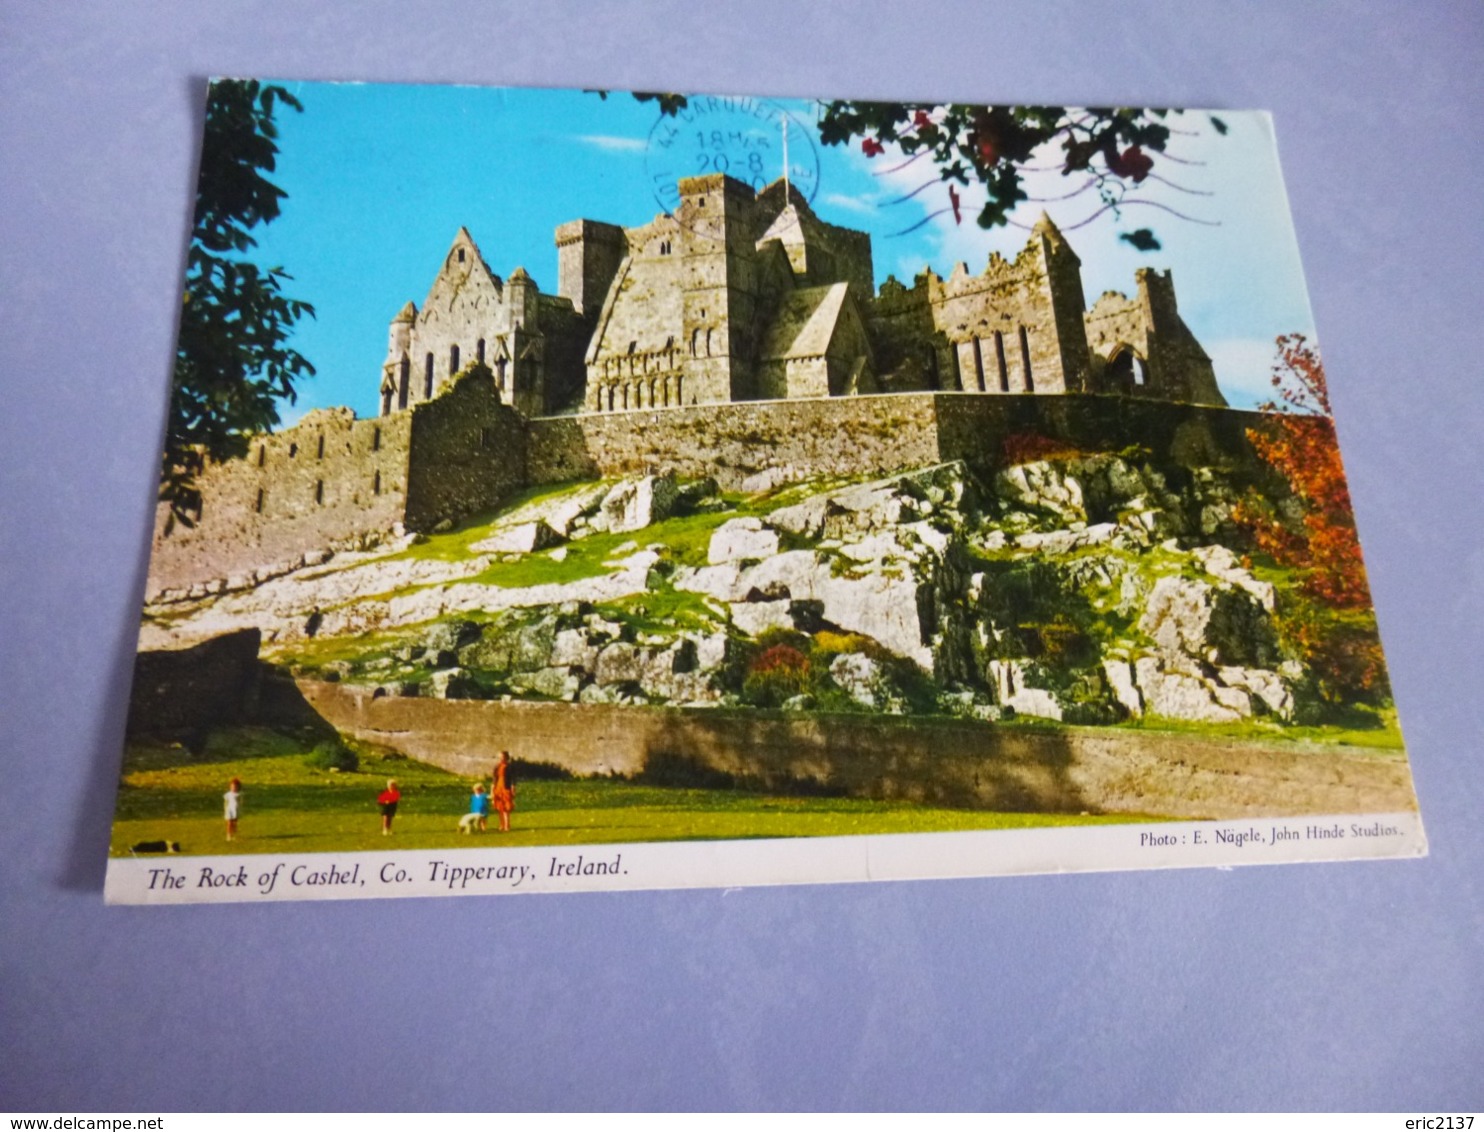 THE ROCK OF CASHEL - Tipperary